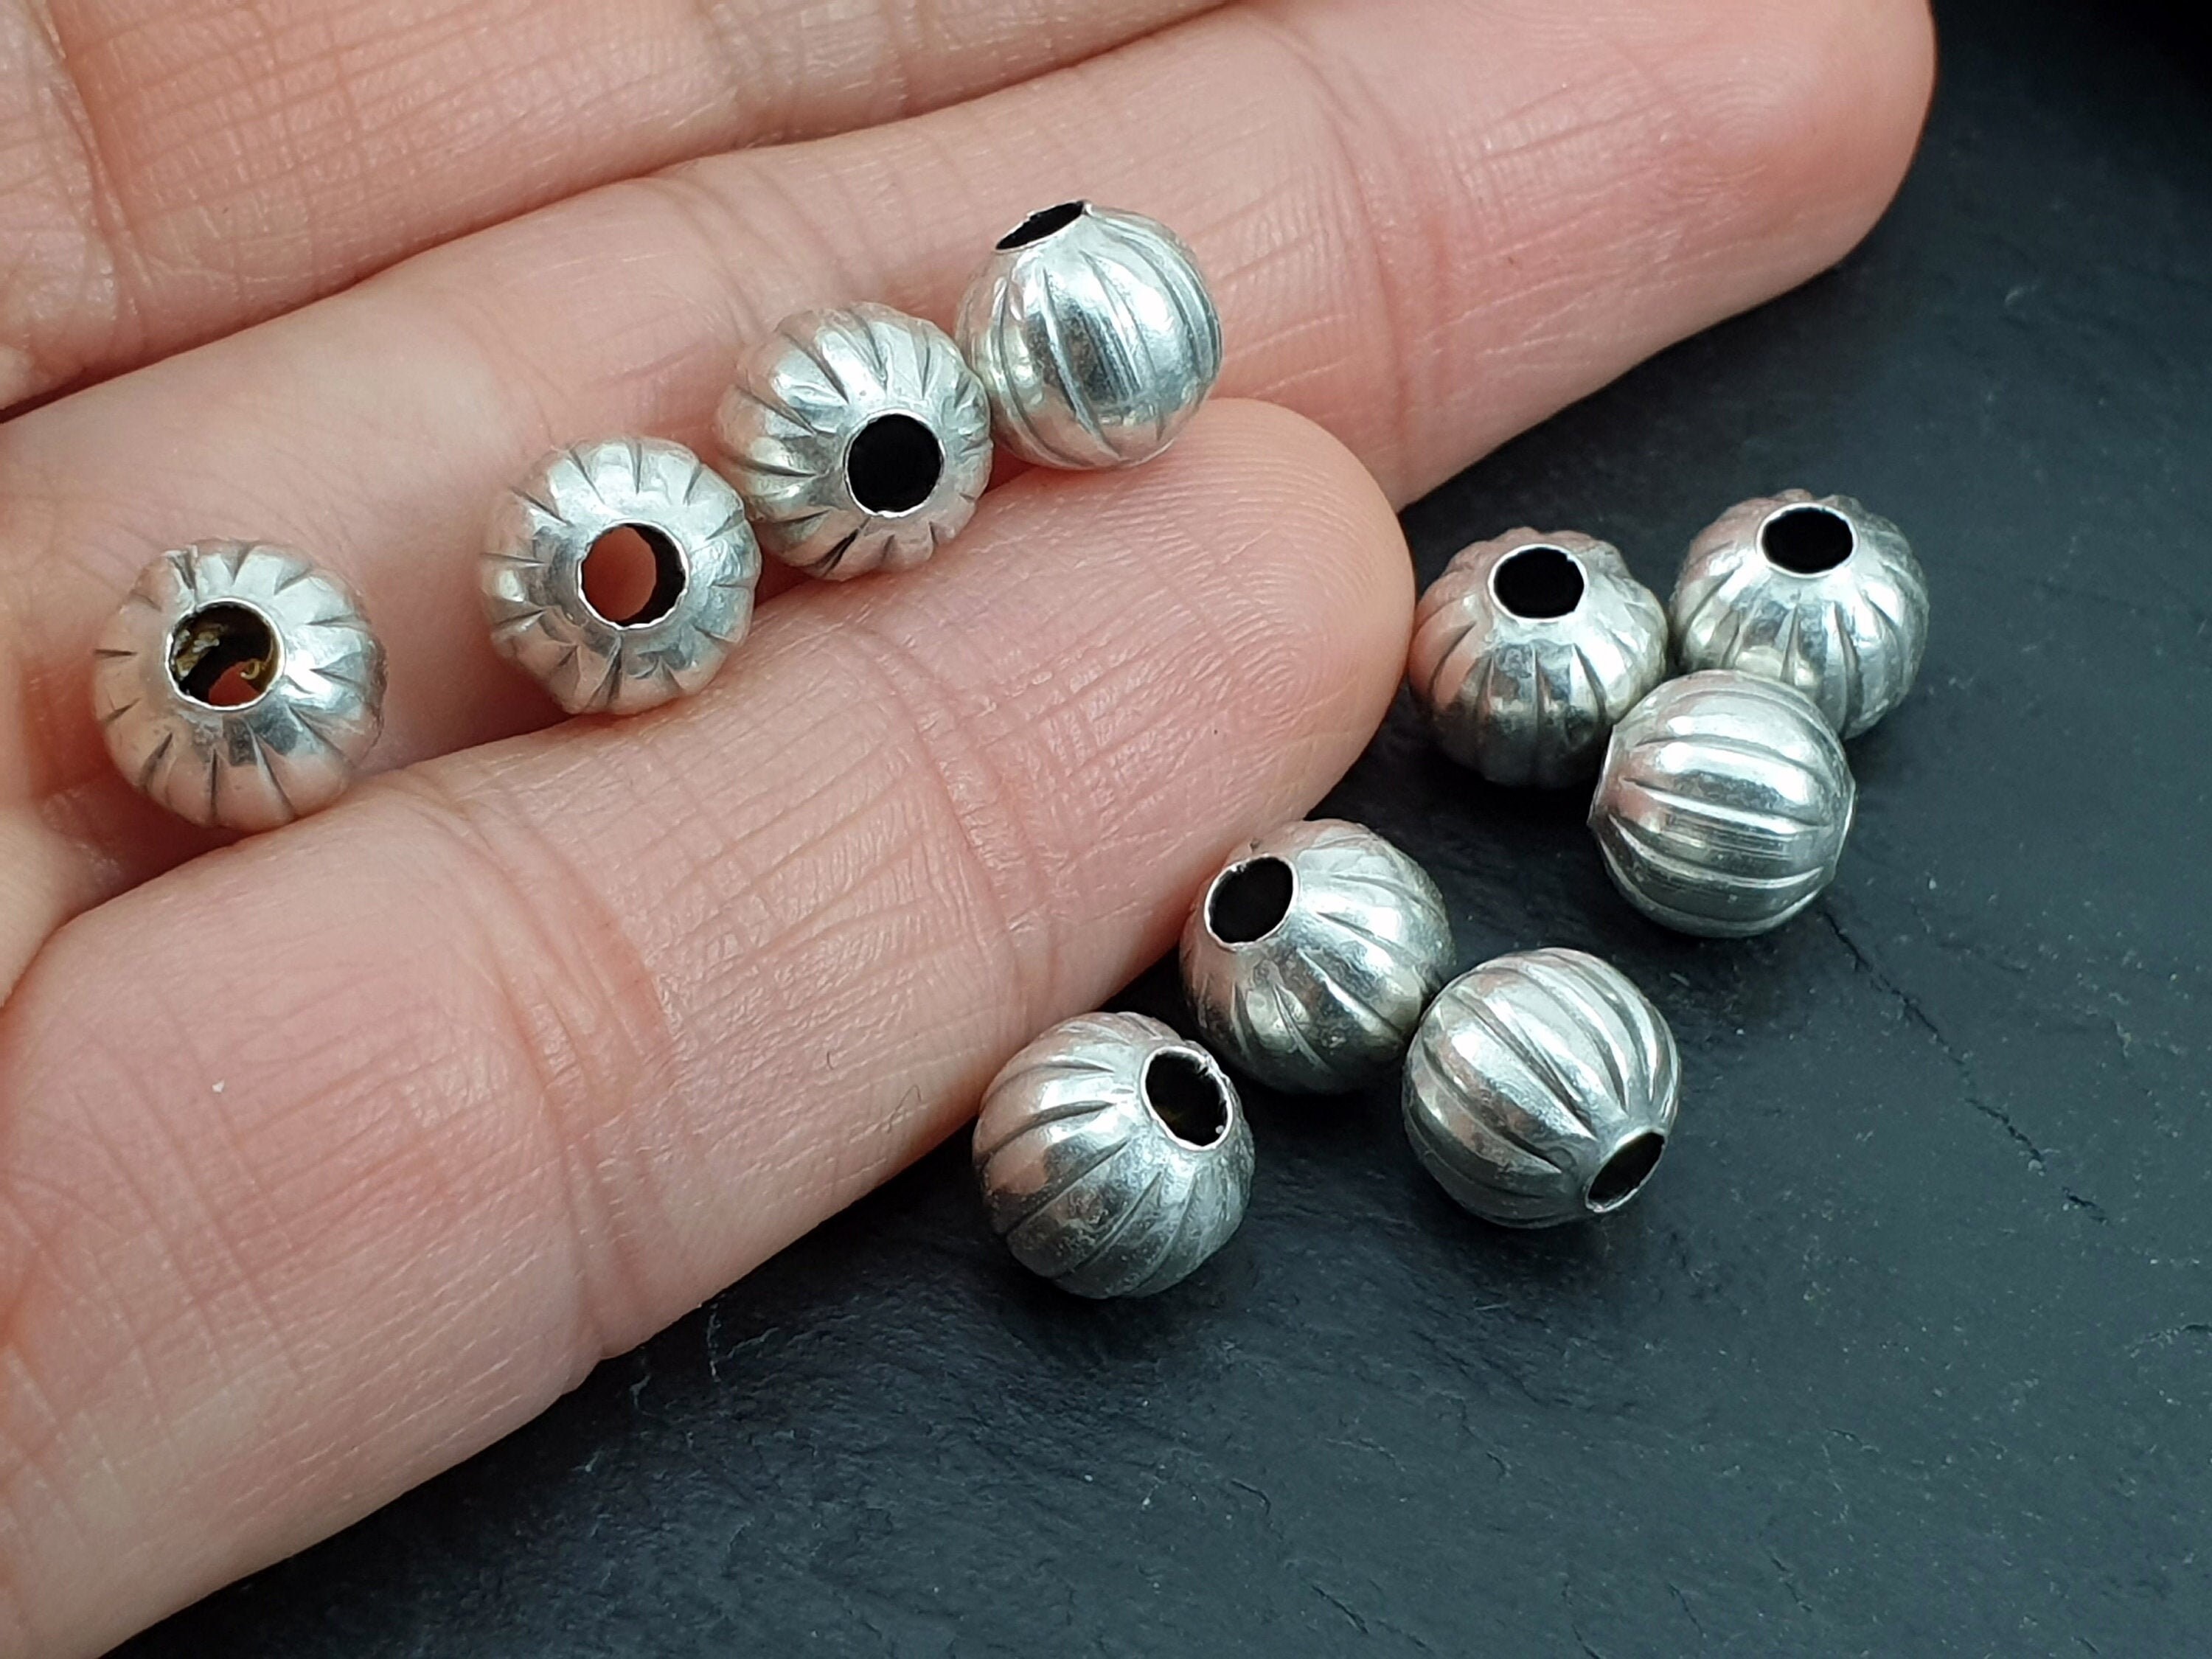 Silver Spacer Beads, Mini Beads, Round Beads, Silver Flower Beads, Jewelry  Spacers, Tiny Silver Beads, Flat Beads, Silver Jewelry, 50 Pc